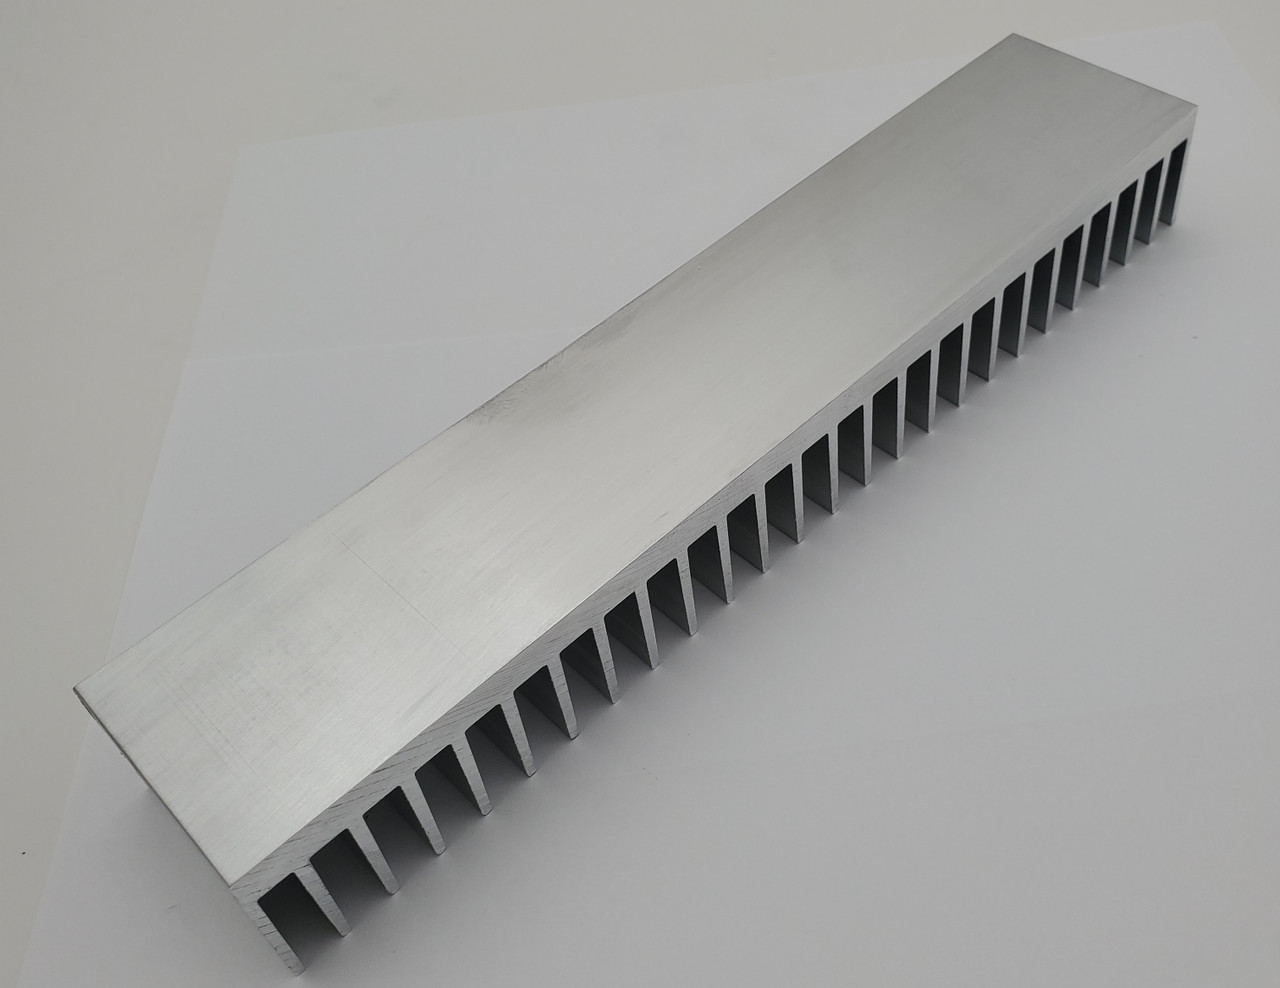 What are the features of an Aluminum extrusion heat sink?